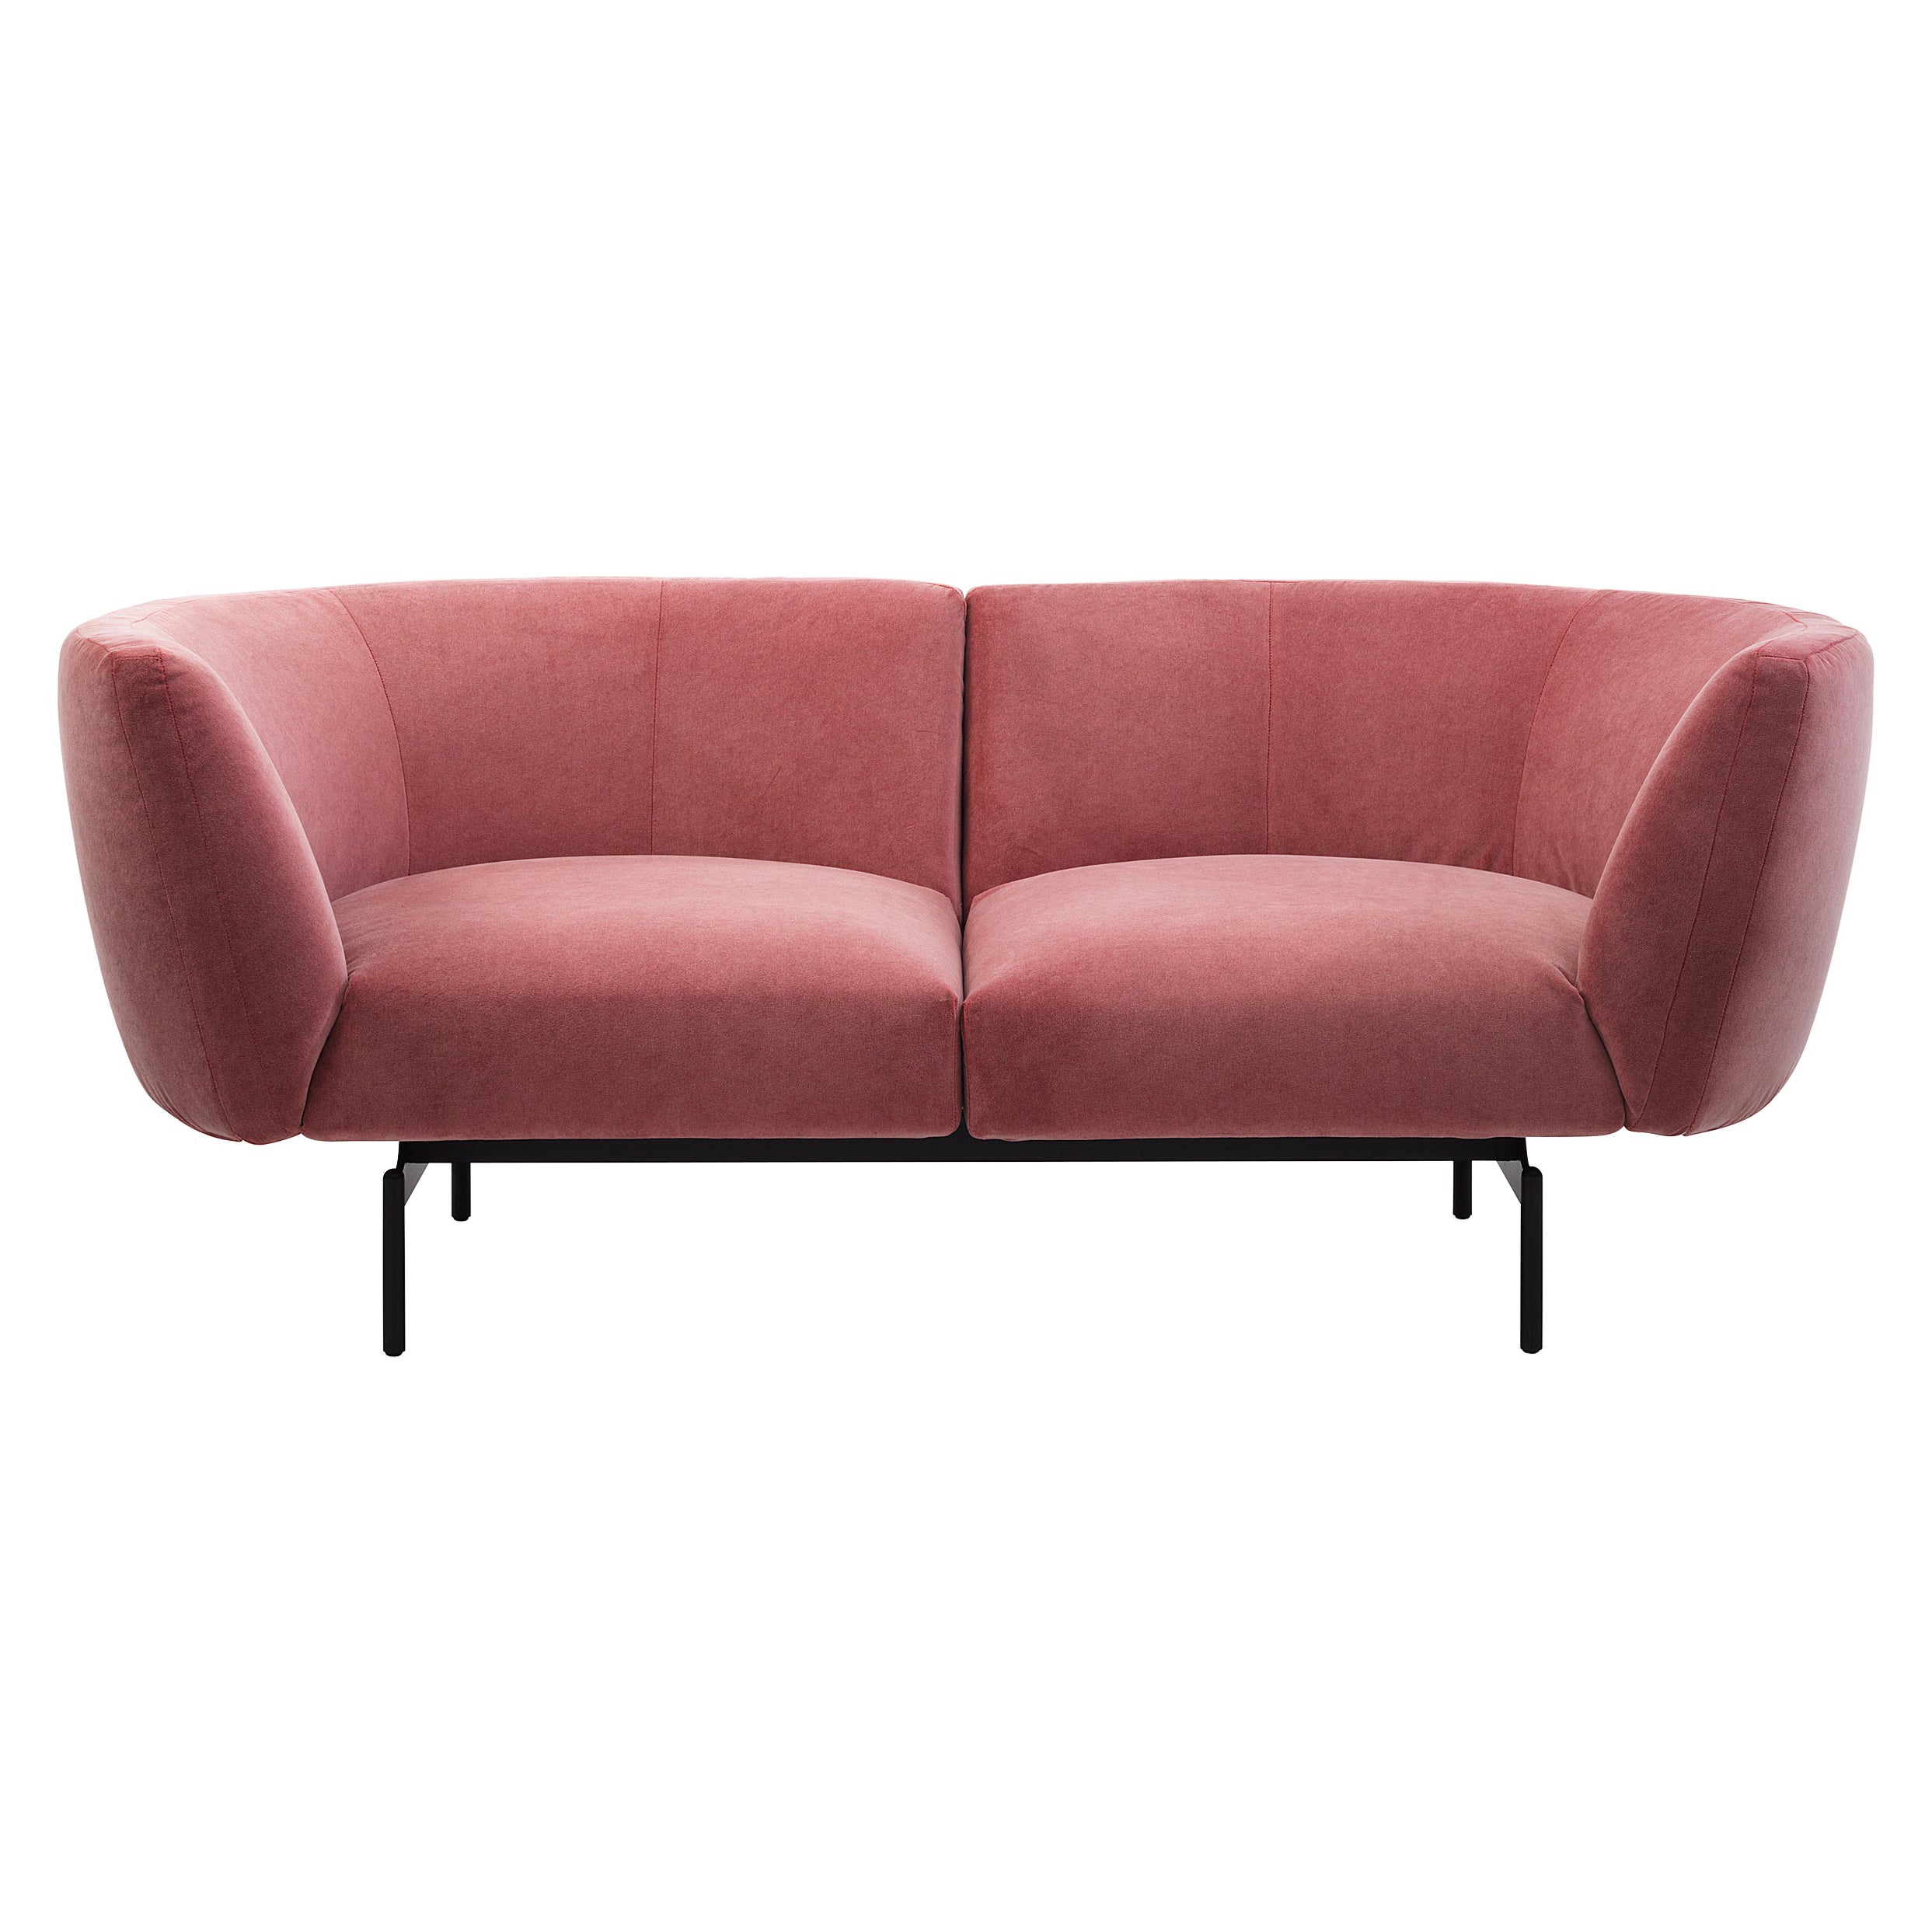 Rendez-Vous Sofa Compound in Extra A8 Upholstery with Black Metal, Sergio Bicego